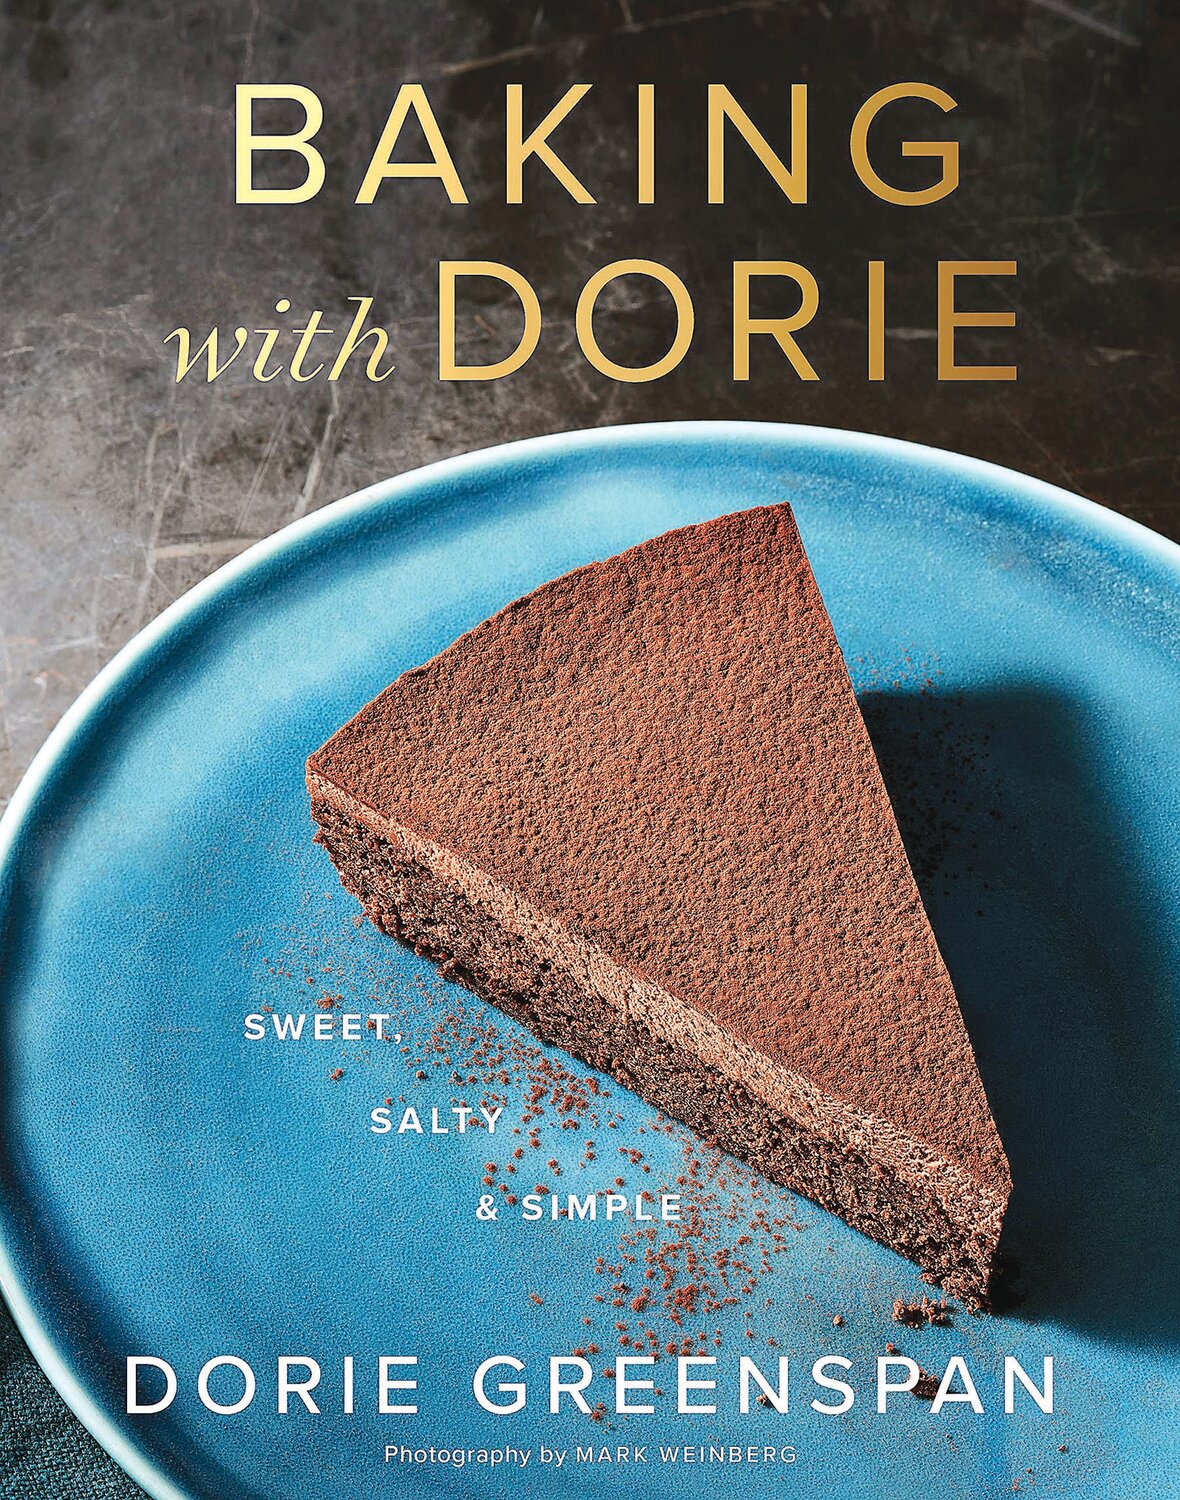 Baking with Dorie by Dorie Greenspan